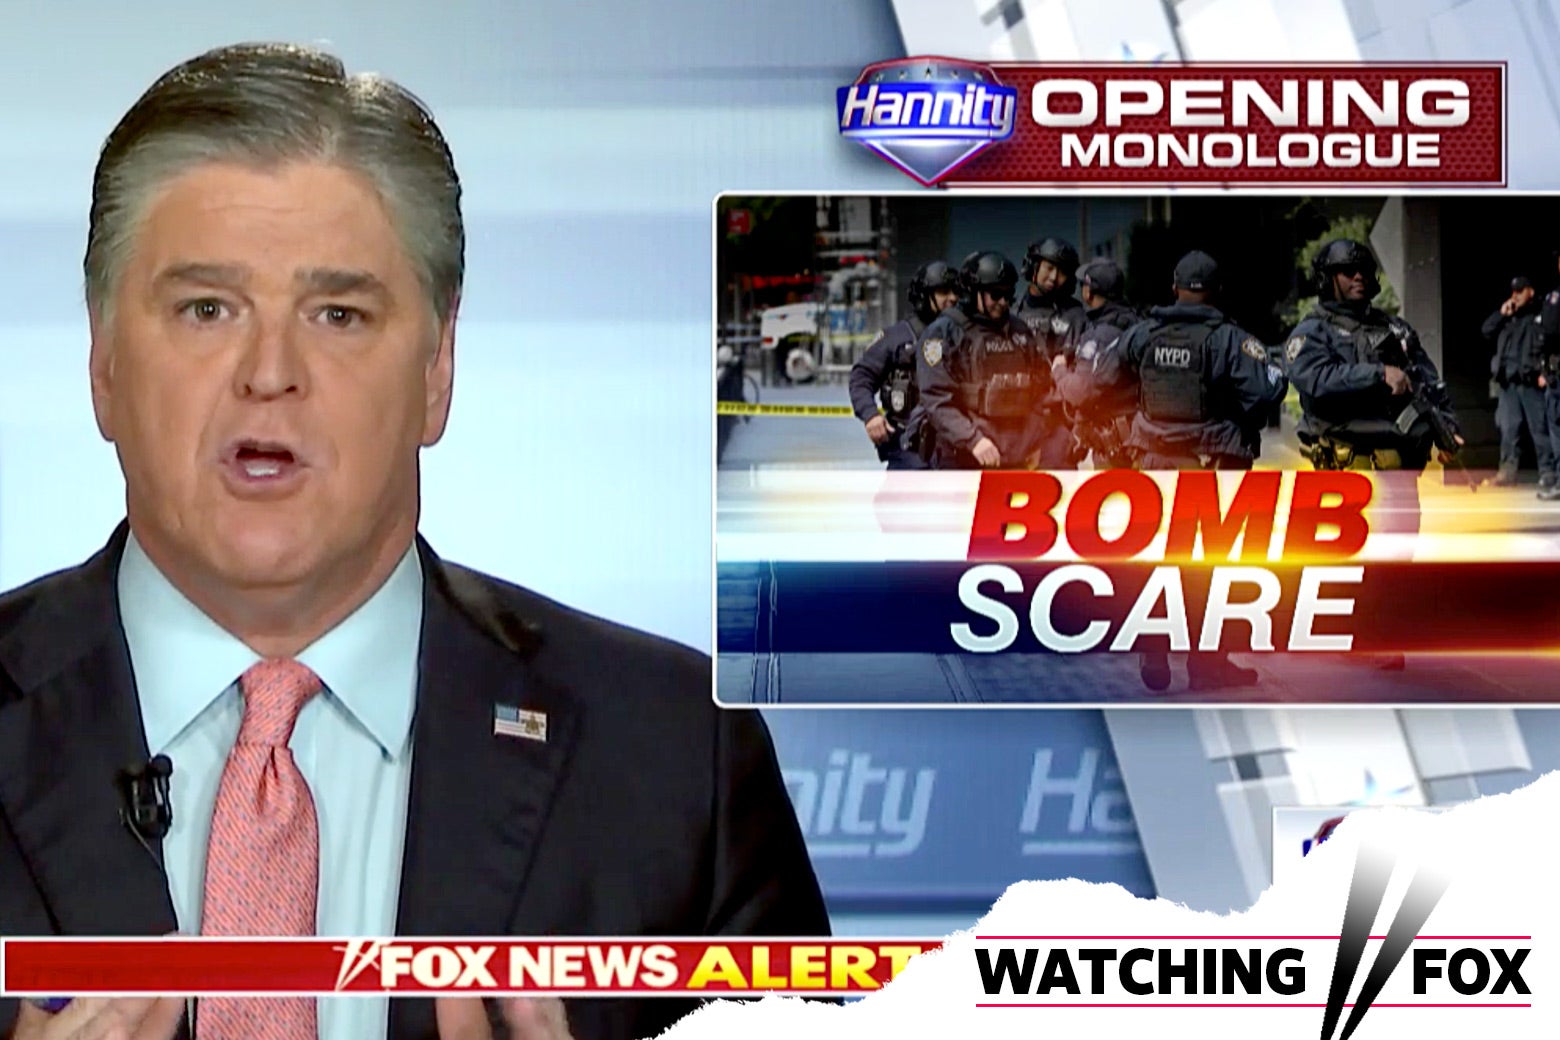 Sean Hannity discussing the pipe bomb scare on Fox News.